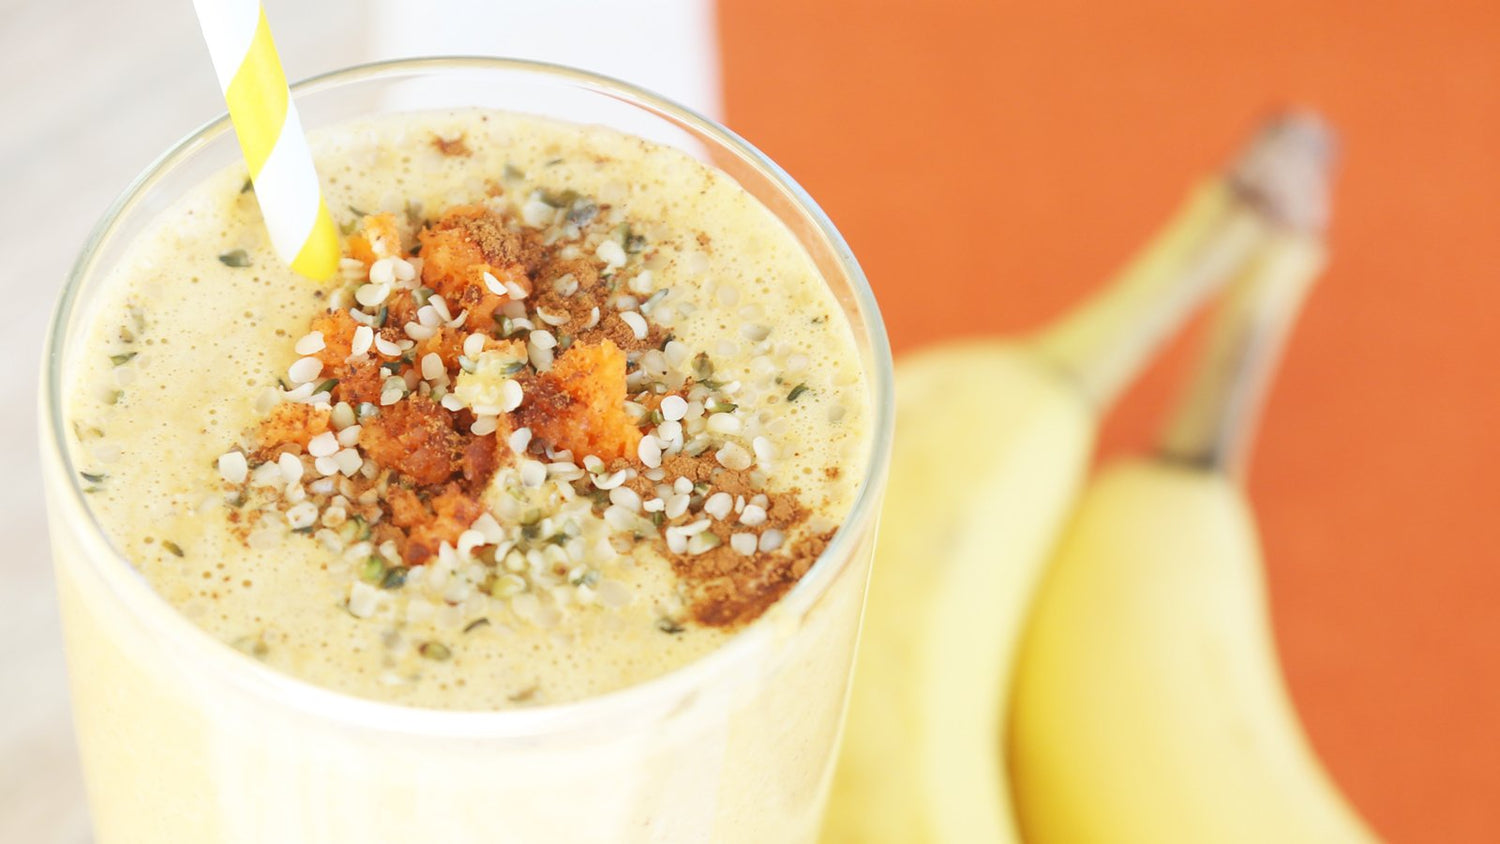 Healthy Carrot Cake Smoothie Made With Manitoba Harvest Shelled Hemp Seeds